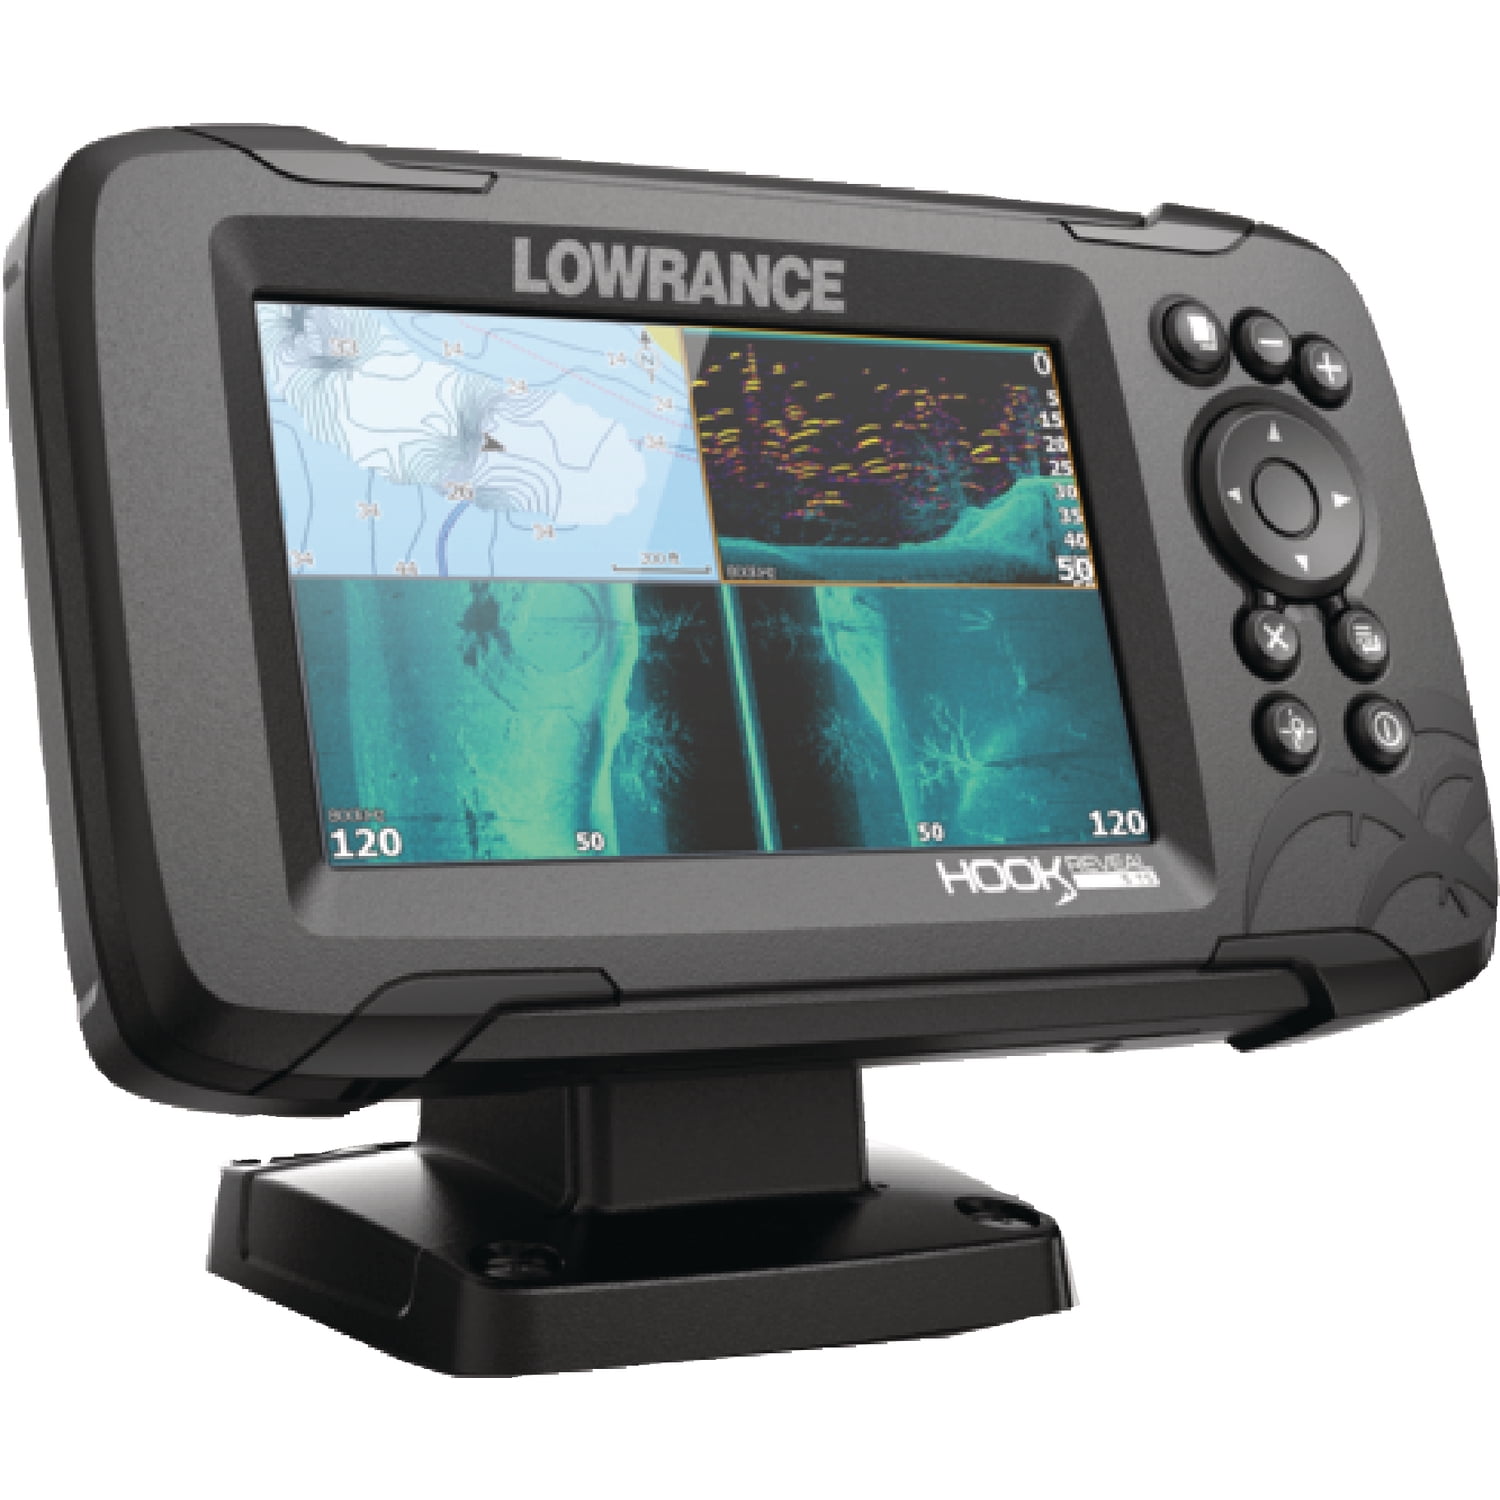 Lowrance 00015857001 Hook Reveal 5 In. Fishfinder with 50/200kHz, C-MAP  Contour and Mapping 